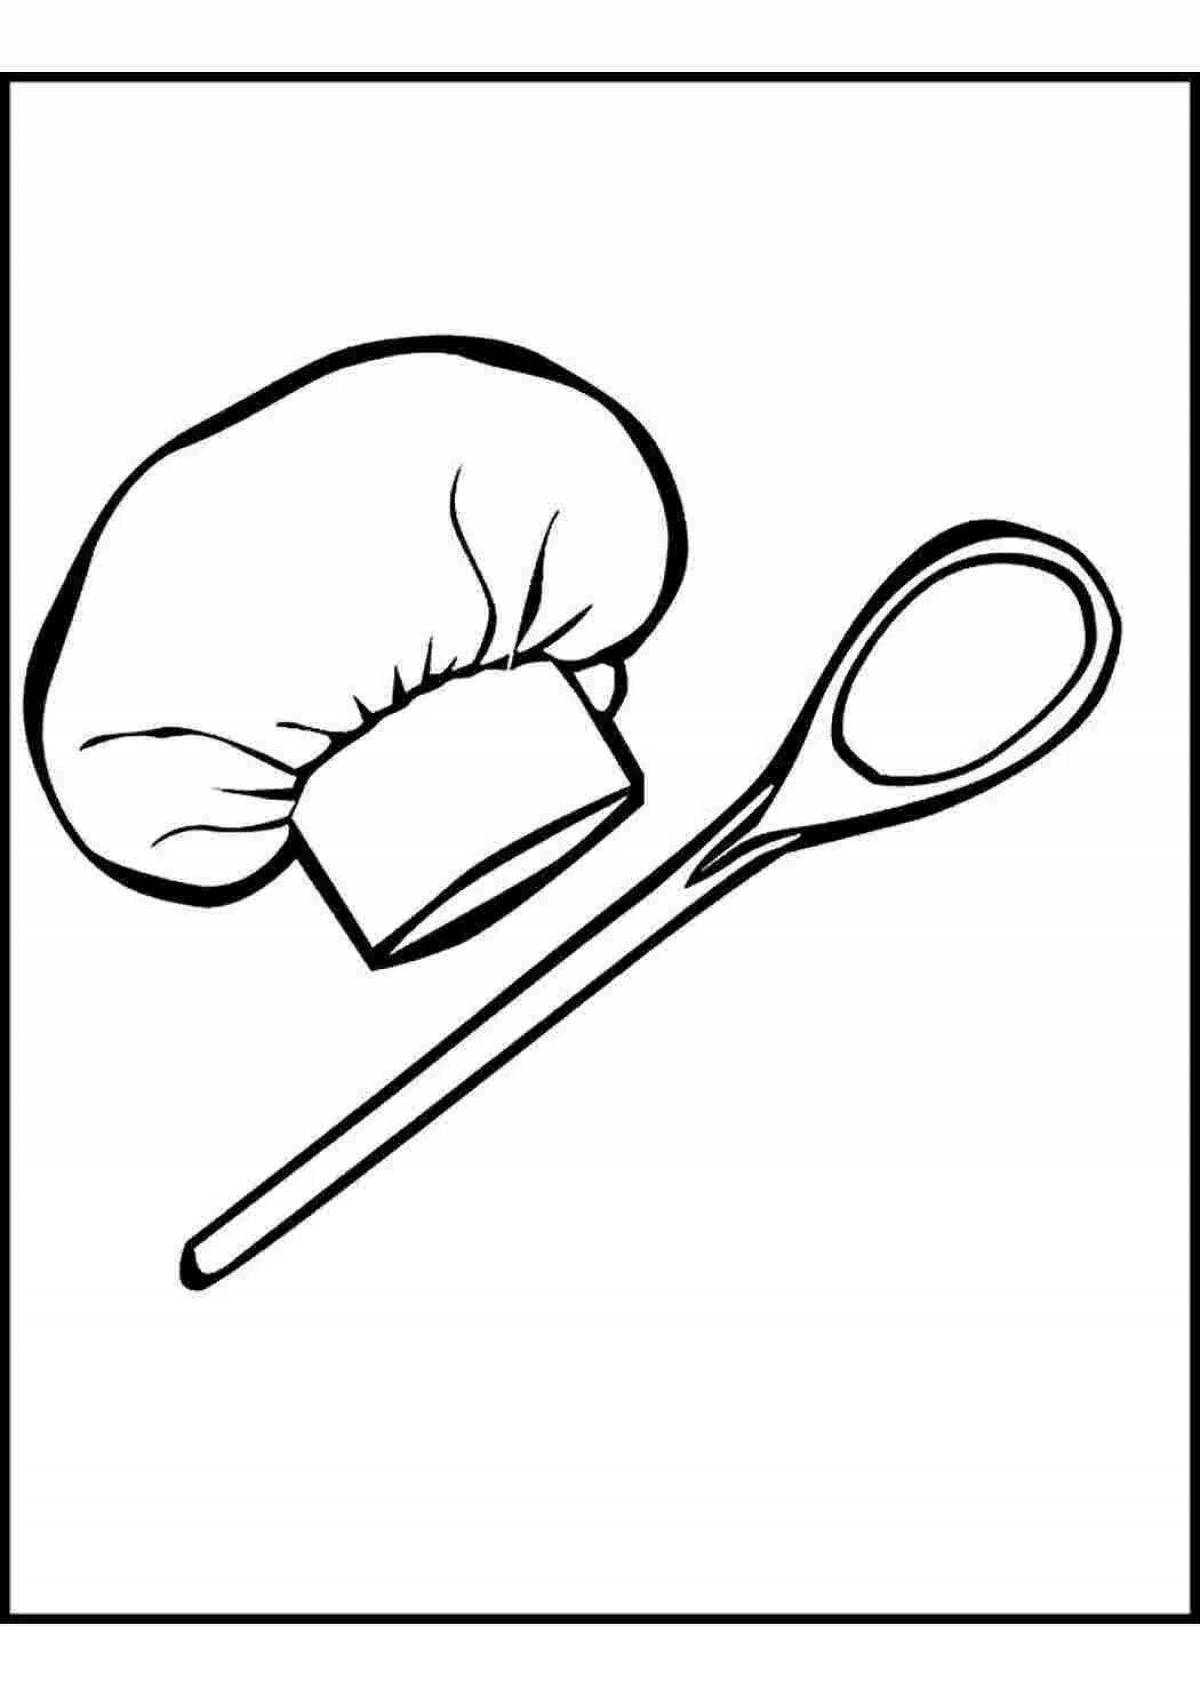 Coloring page happy chef's hat